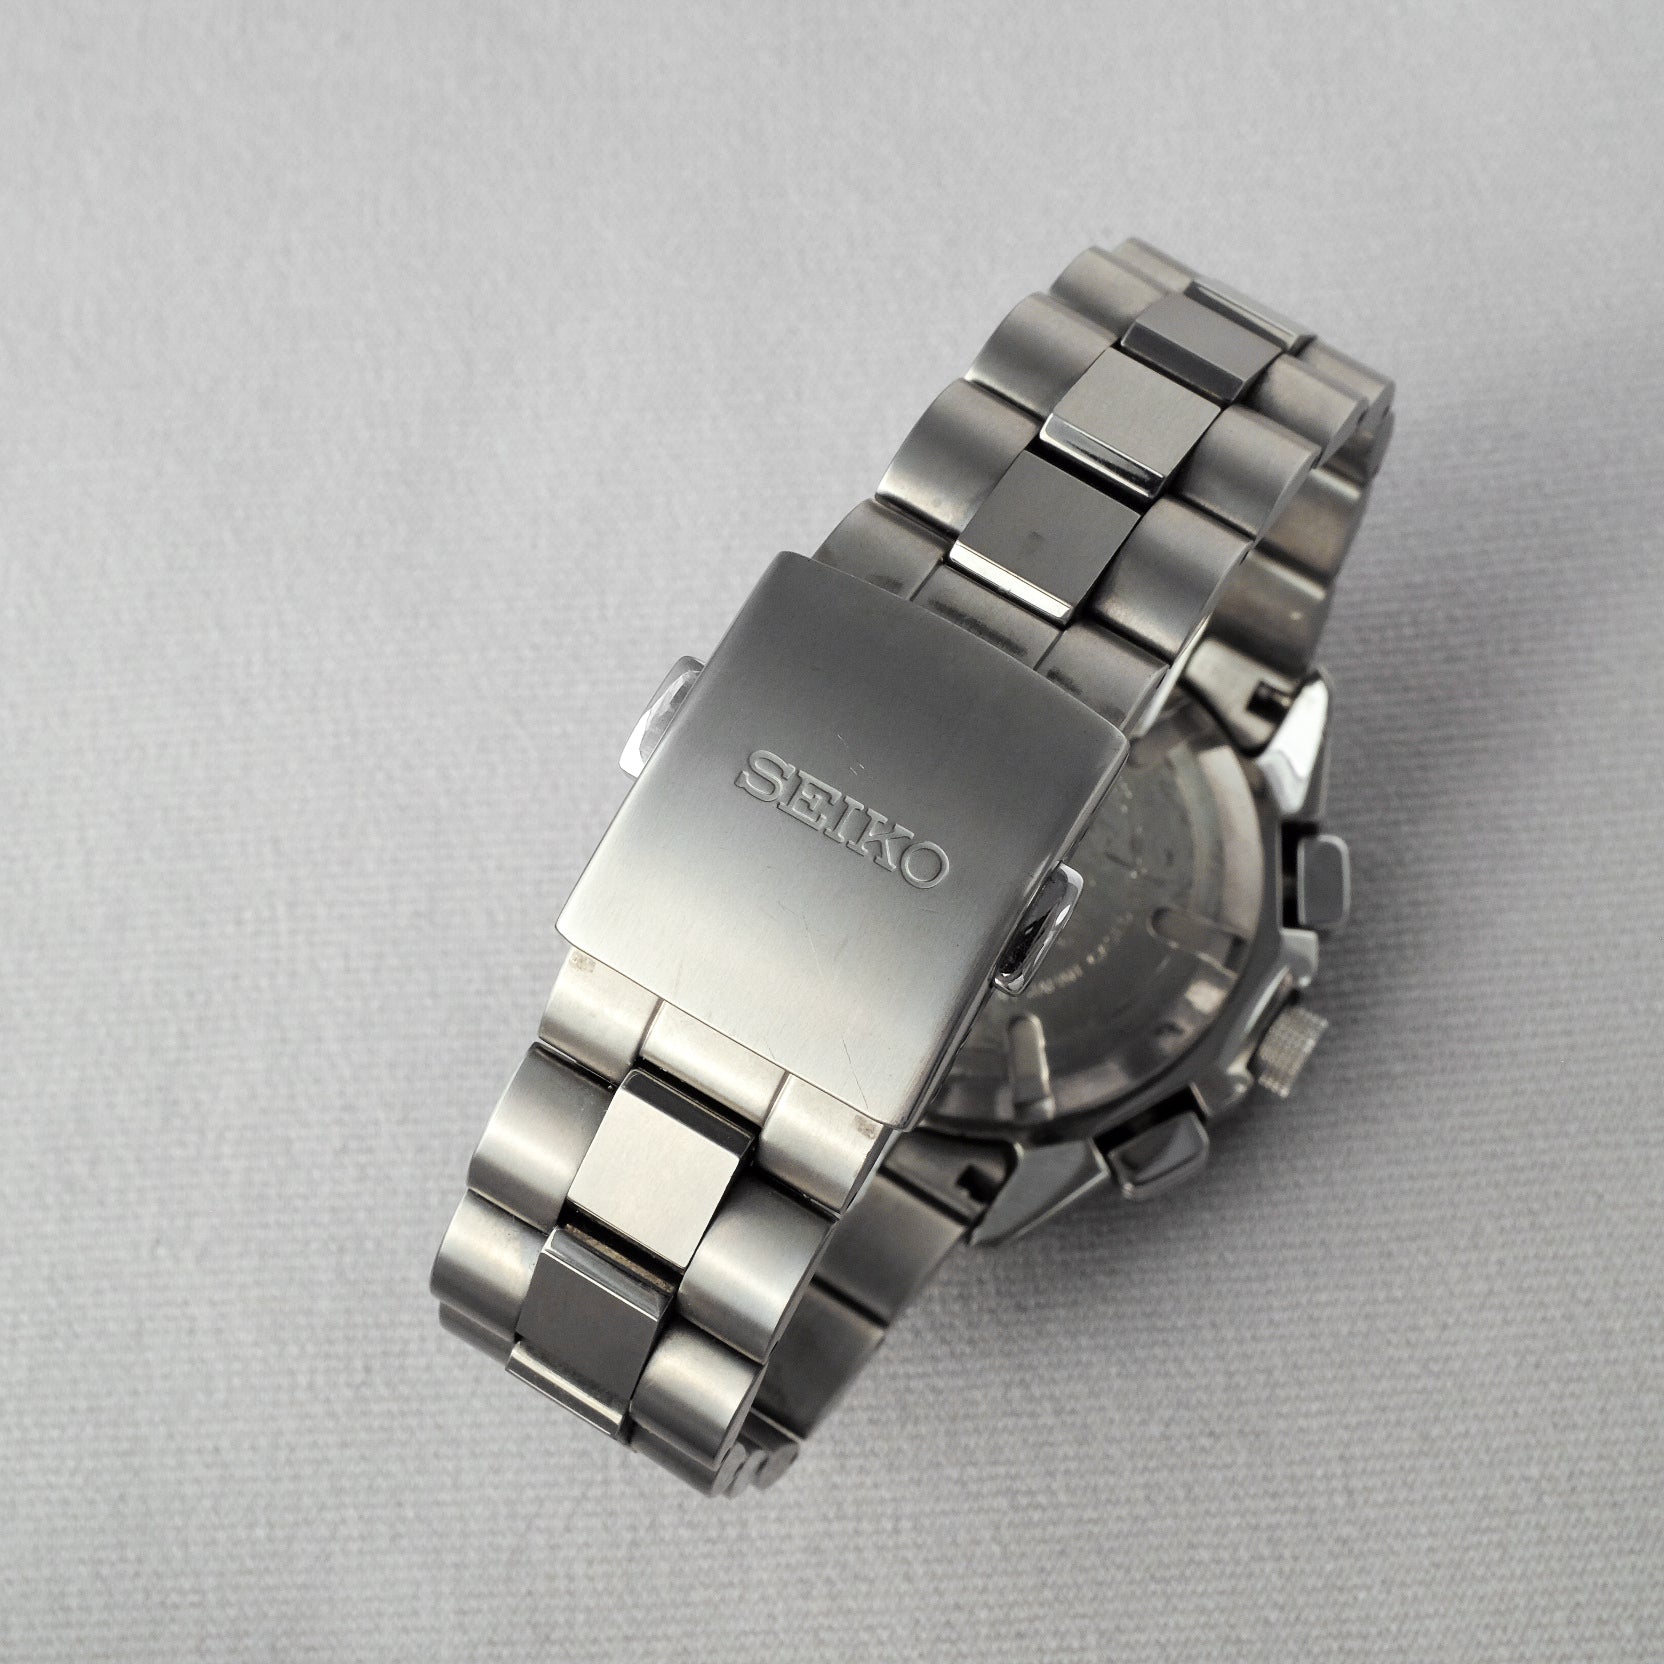 Seiko Ignition SBHV007 from 2006